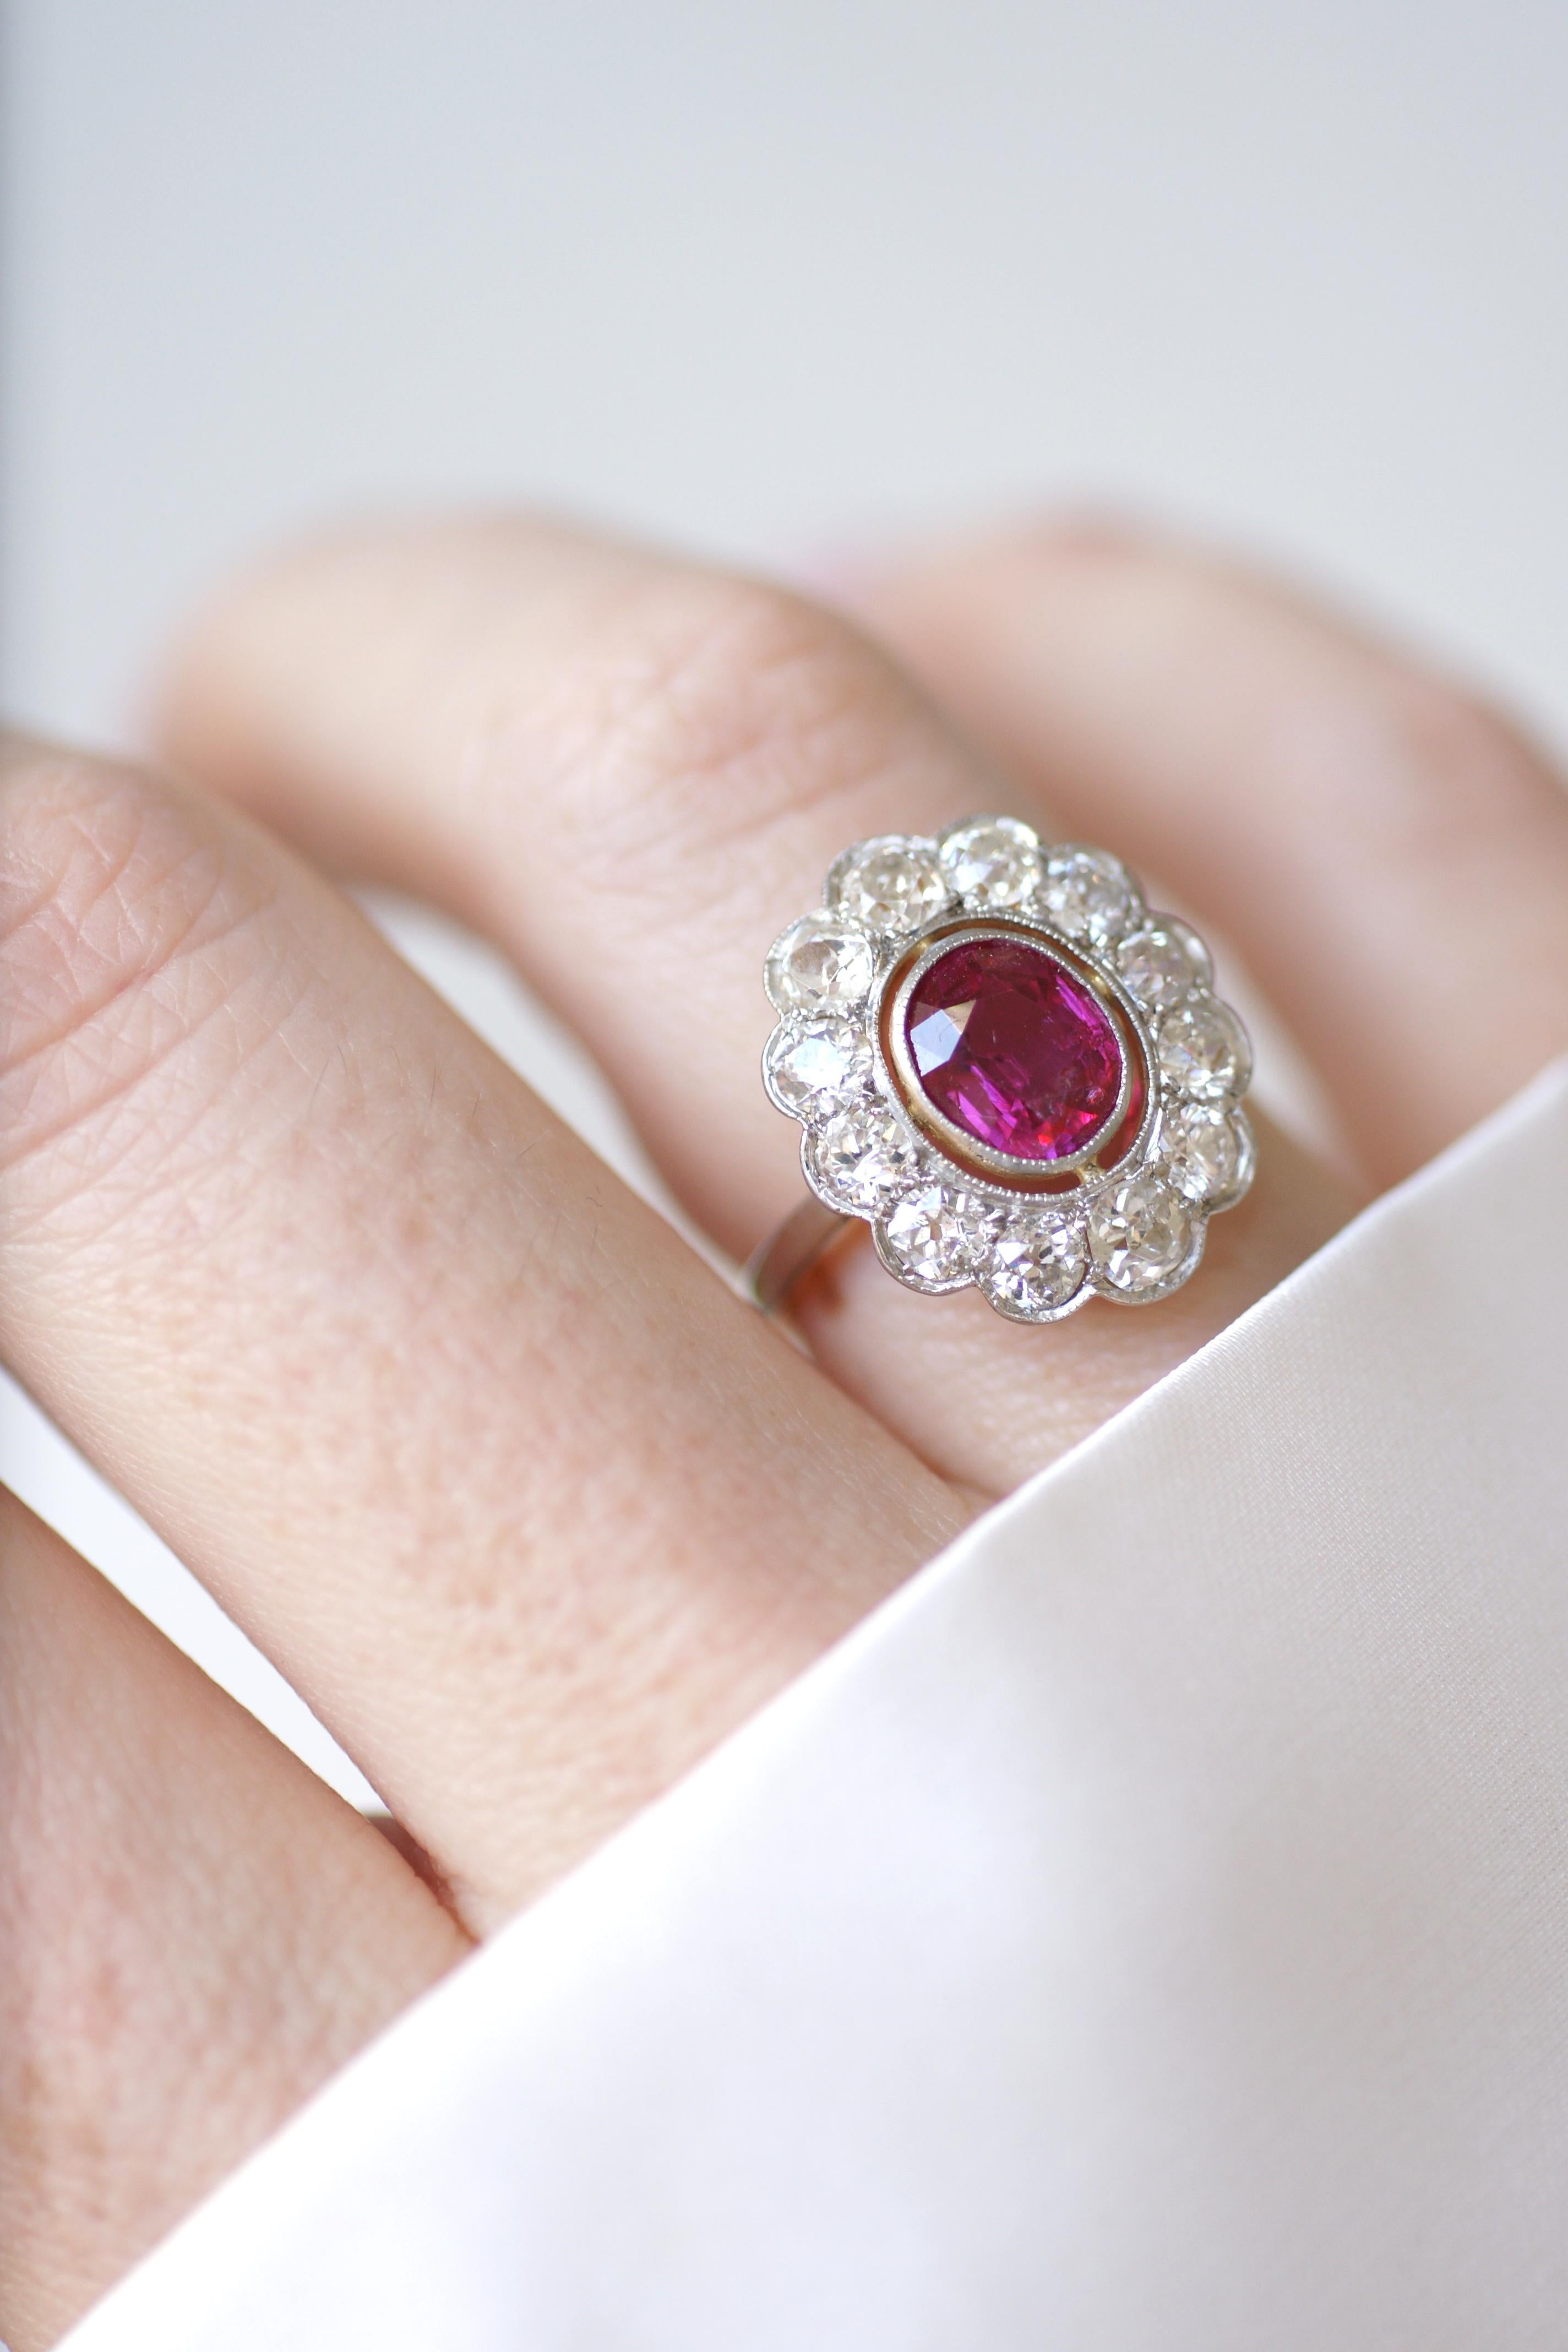 Oval Cut Edwardian Cluster Ring, Unheated Burmese Ruby 1.60 Cts, Diamond Surround For Sale